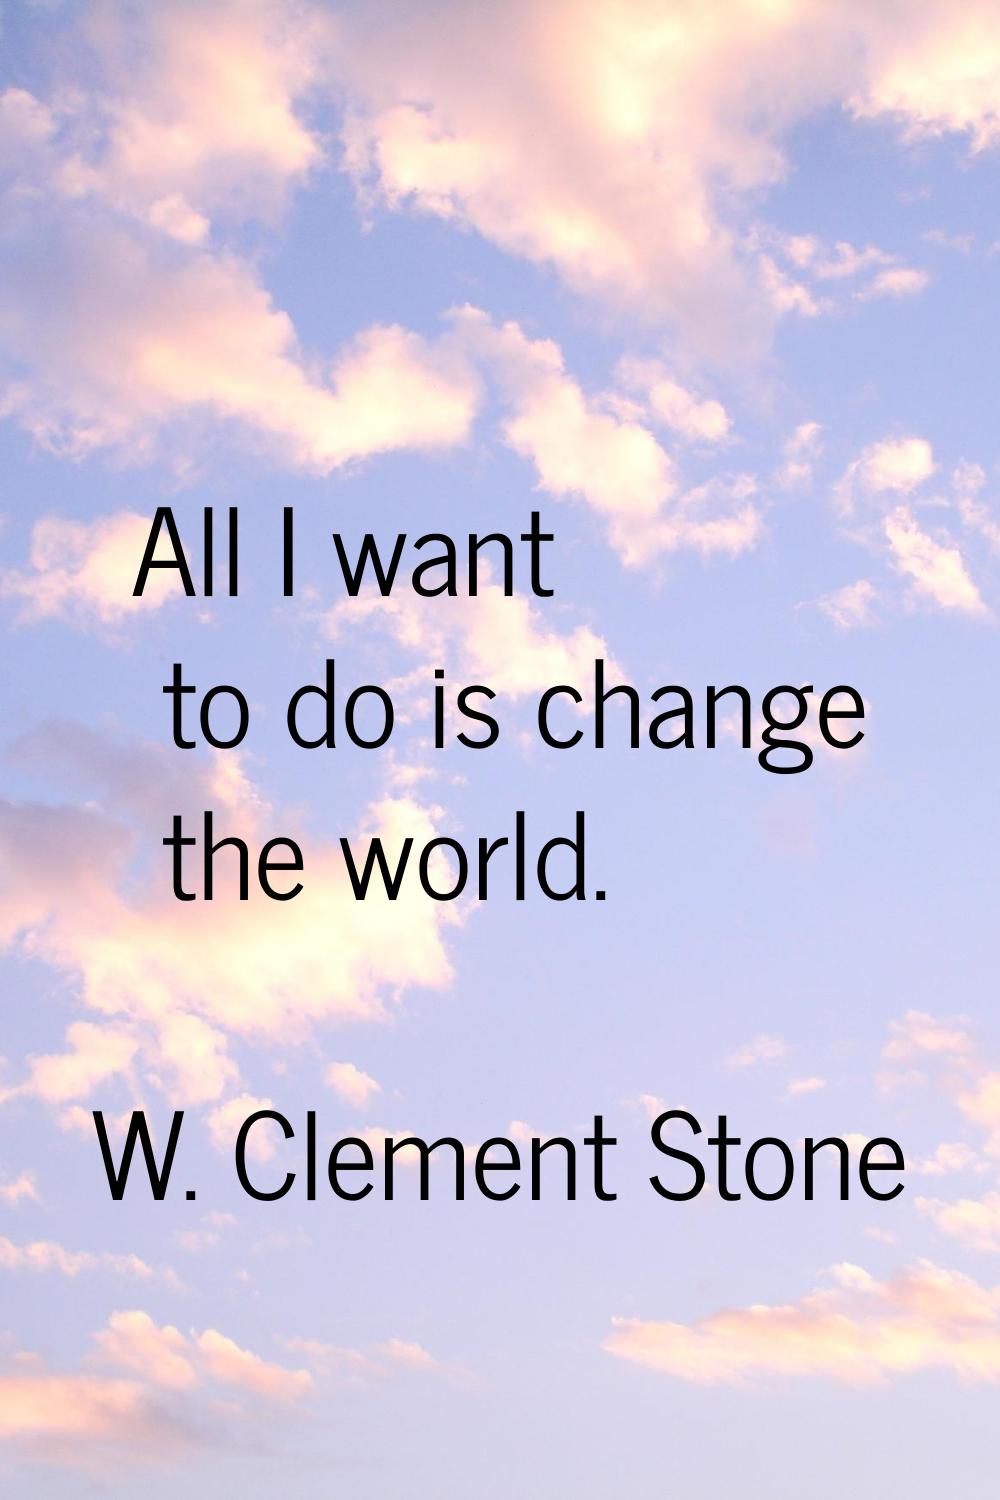 All I want to do is change the world.